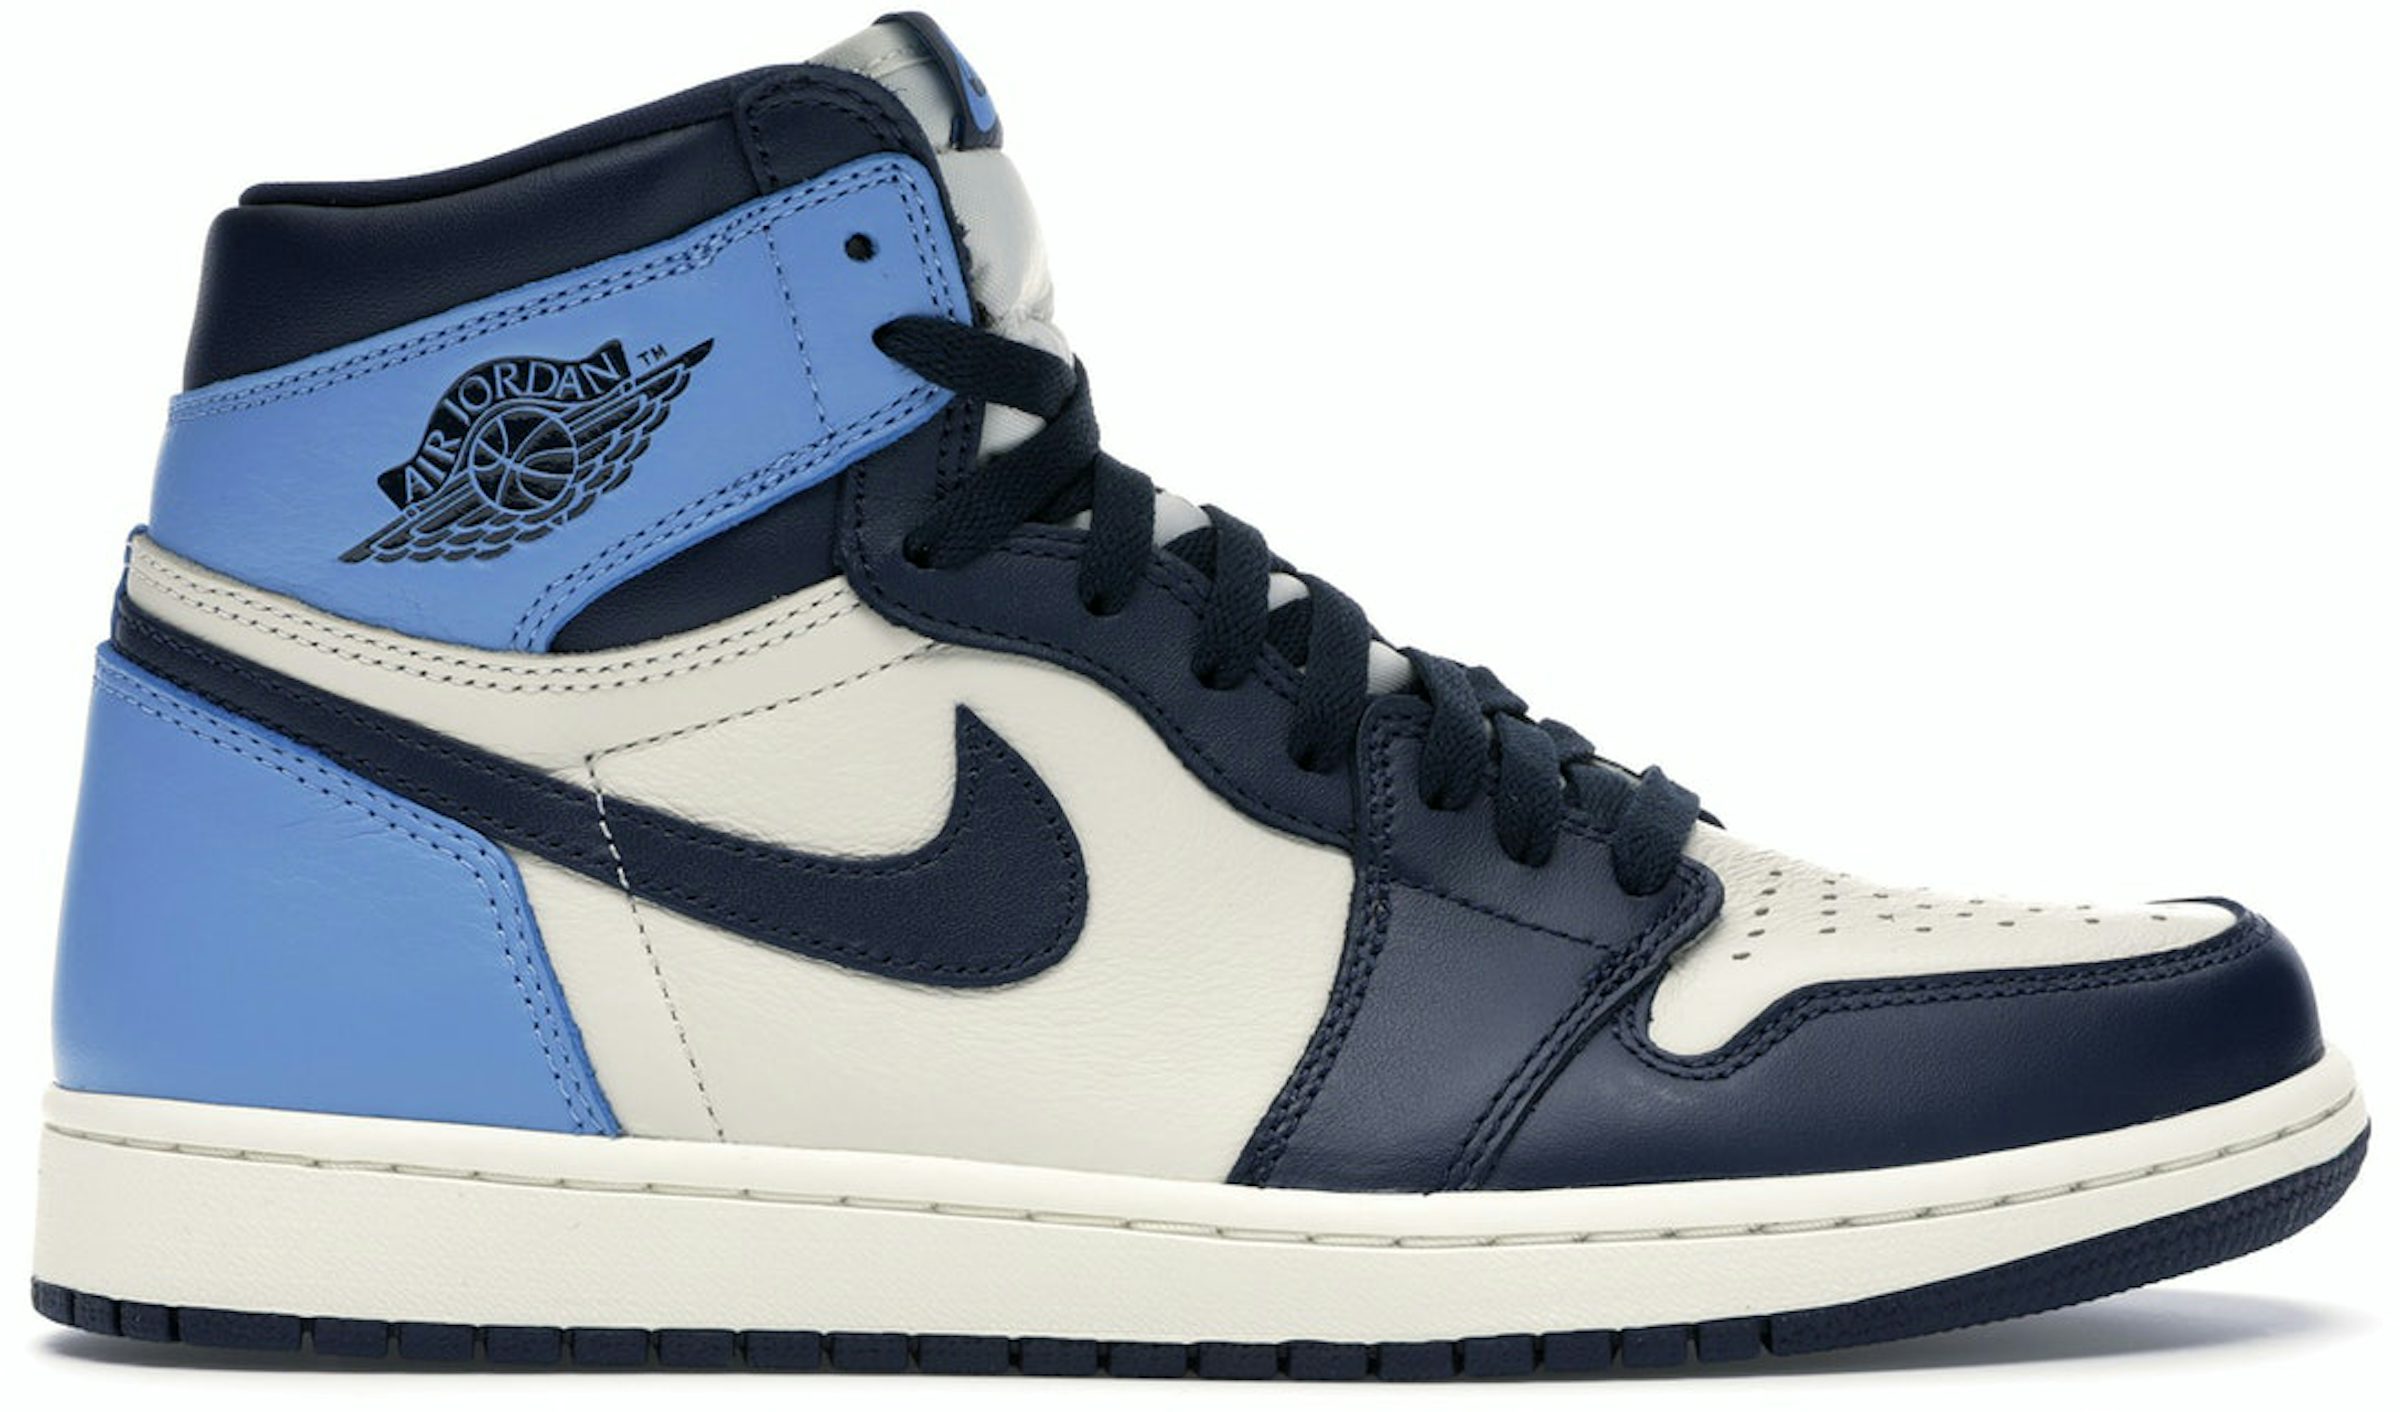 Cop the Air Jordan 1 Obsidian Now at StockX